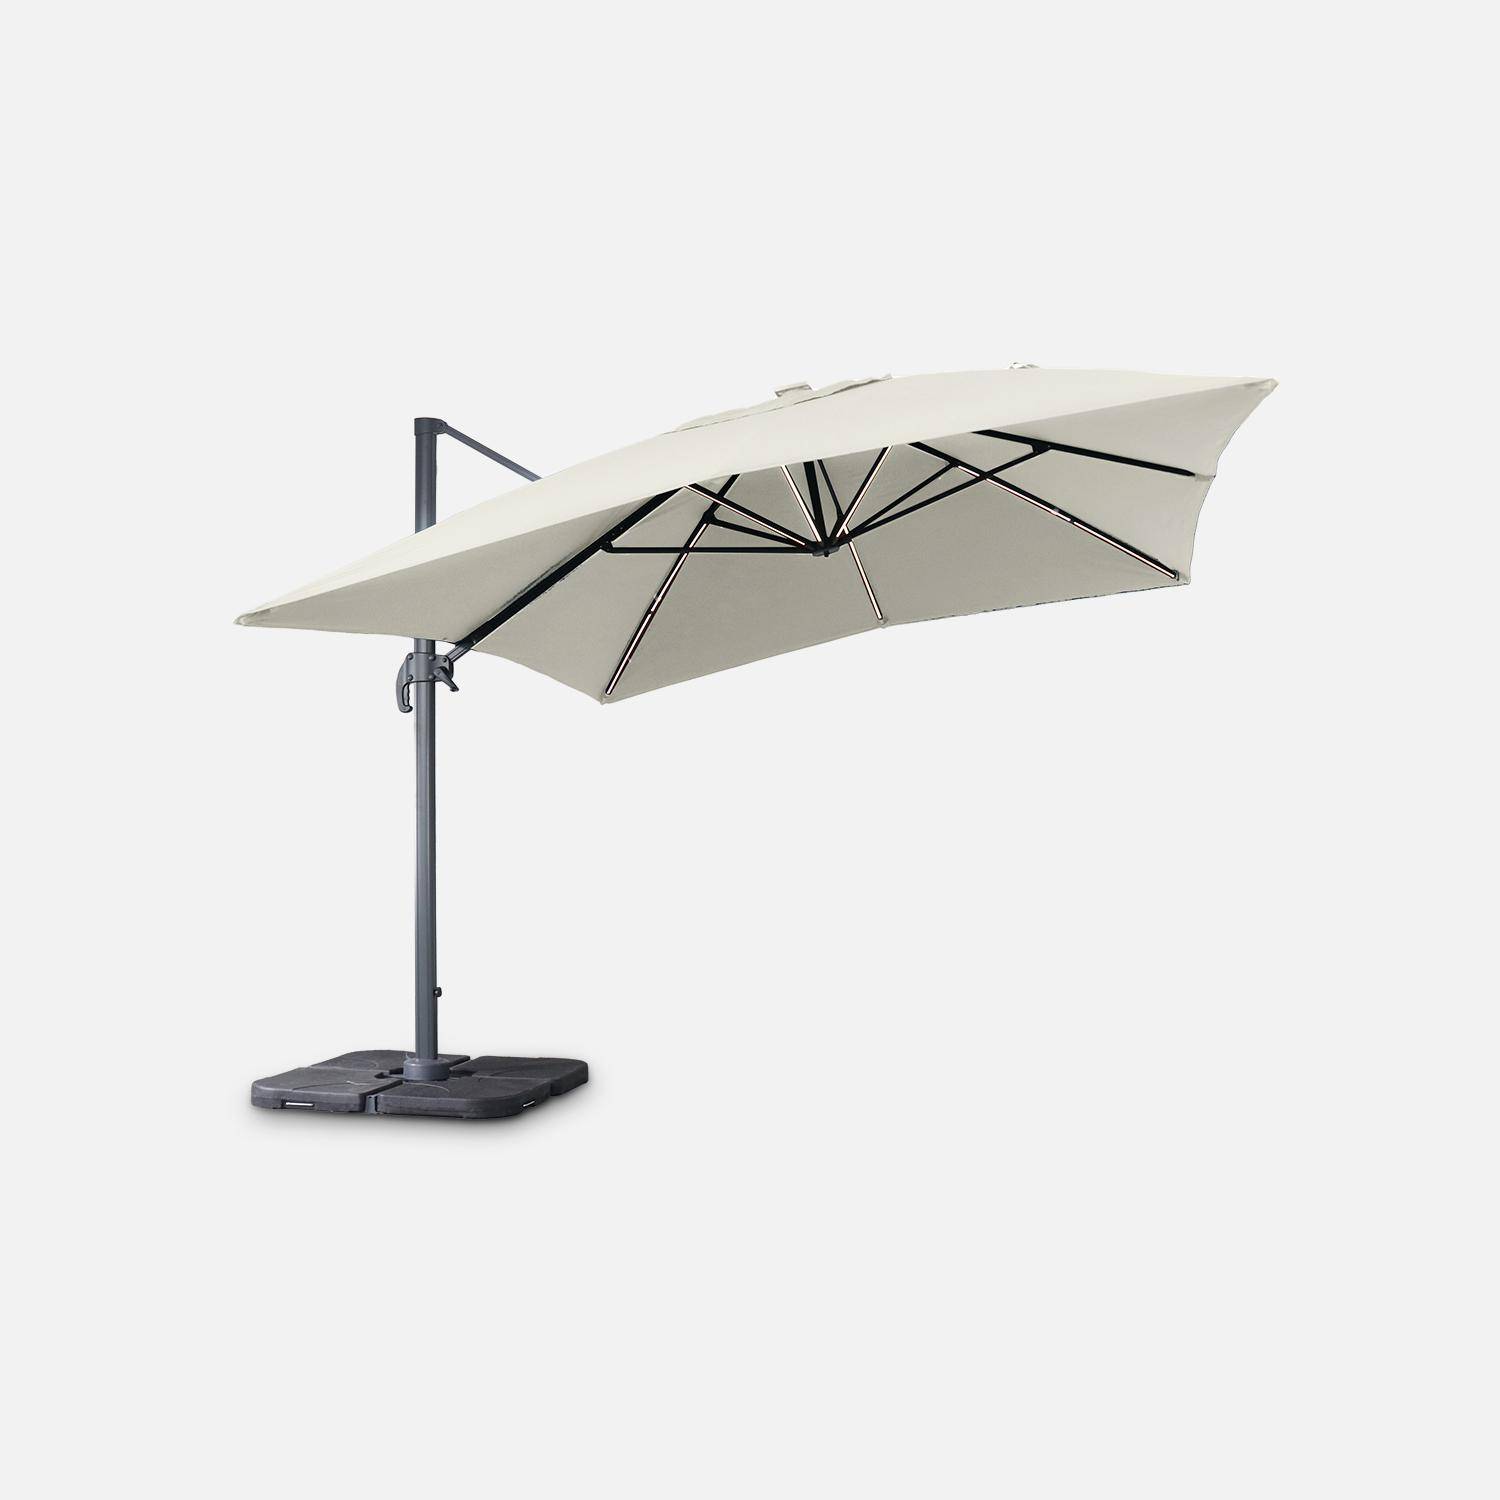 Premium quality rectangular 3x4m cantilever parasol with solar-powered integrated LED lights - Cantilever parasol, tiltable, foldable with 360° rotation, solar charging, cover included - Luce - Beige Photo2